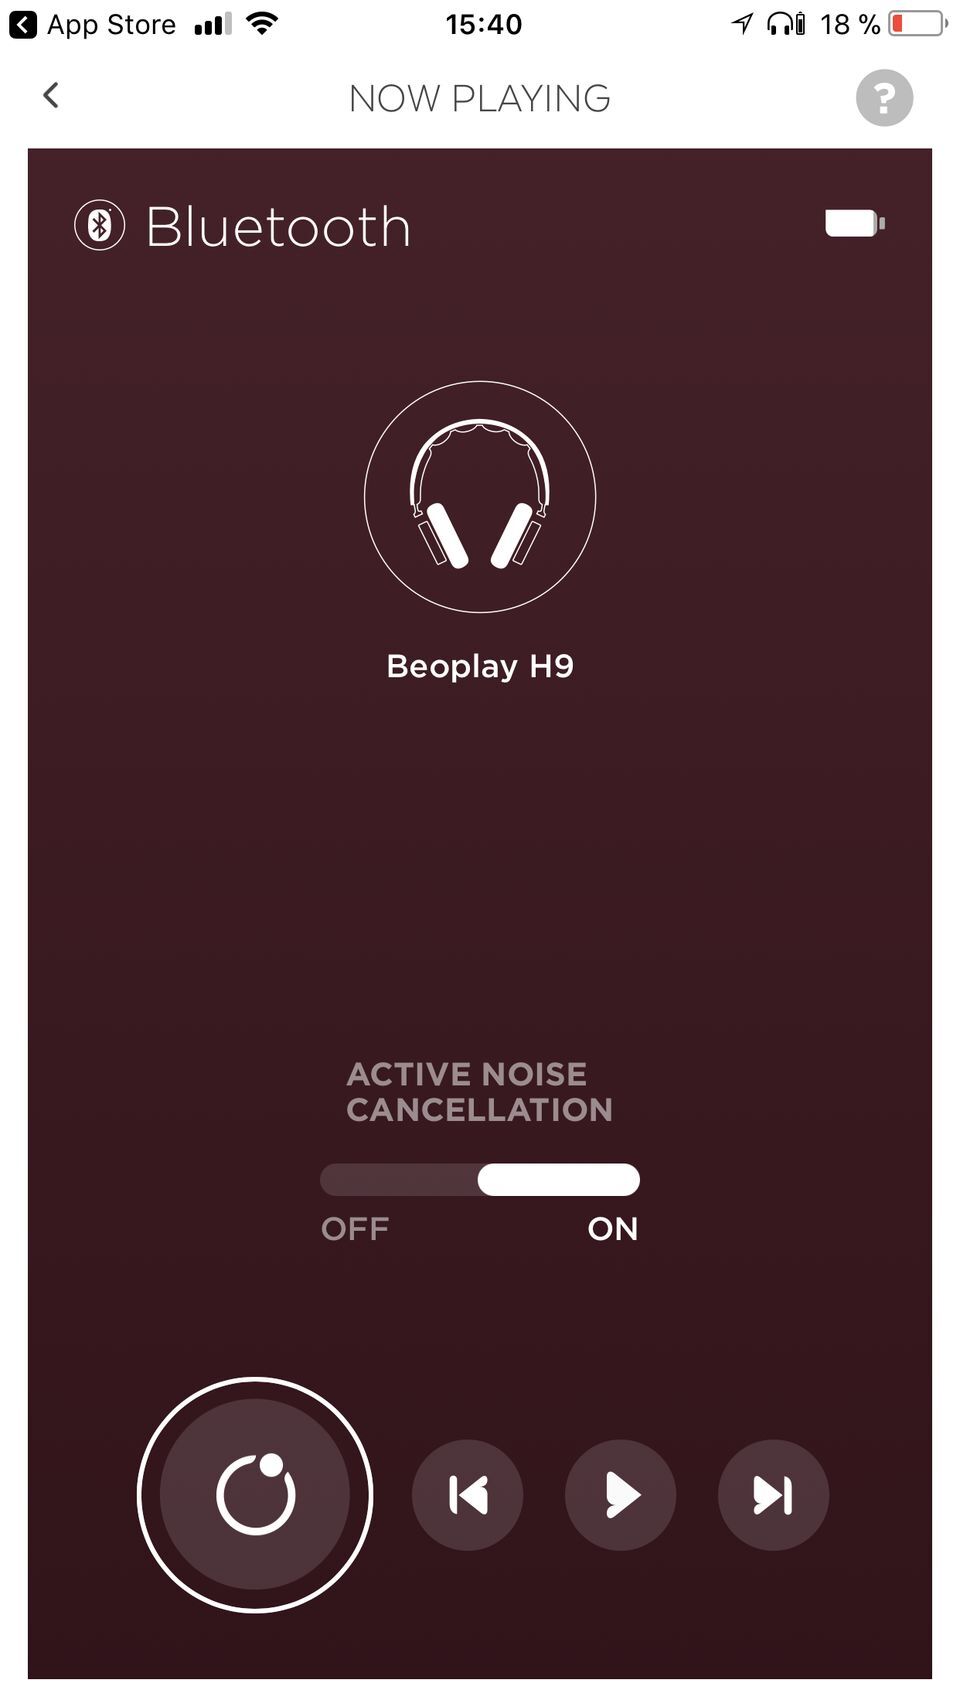 Beoplay